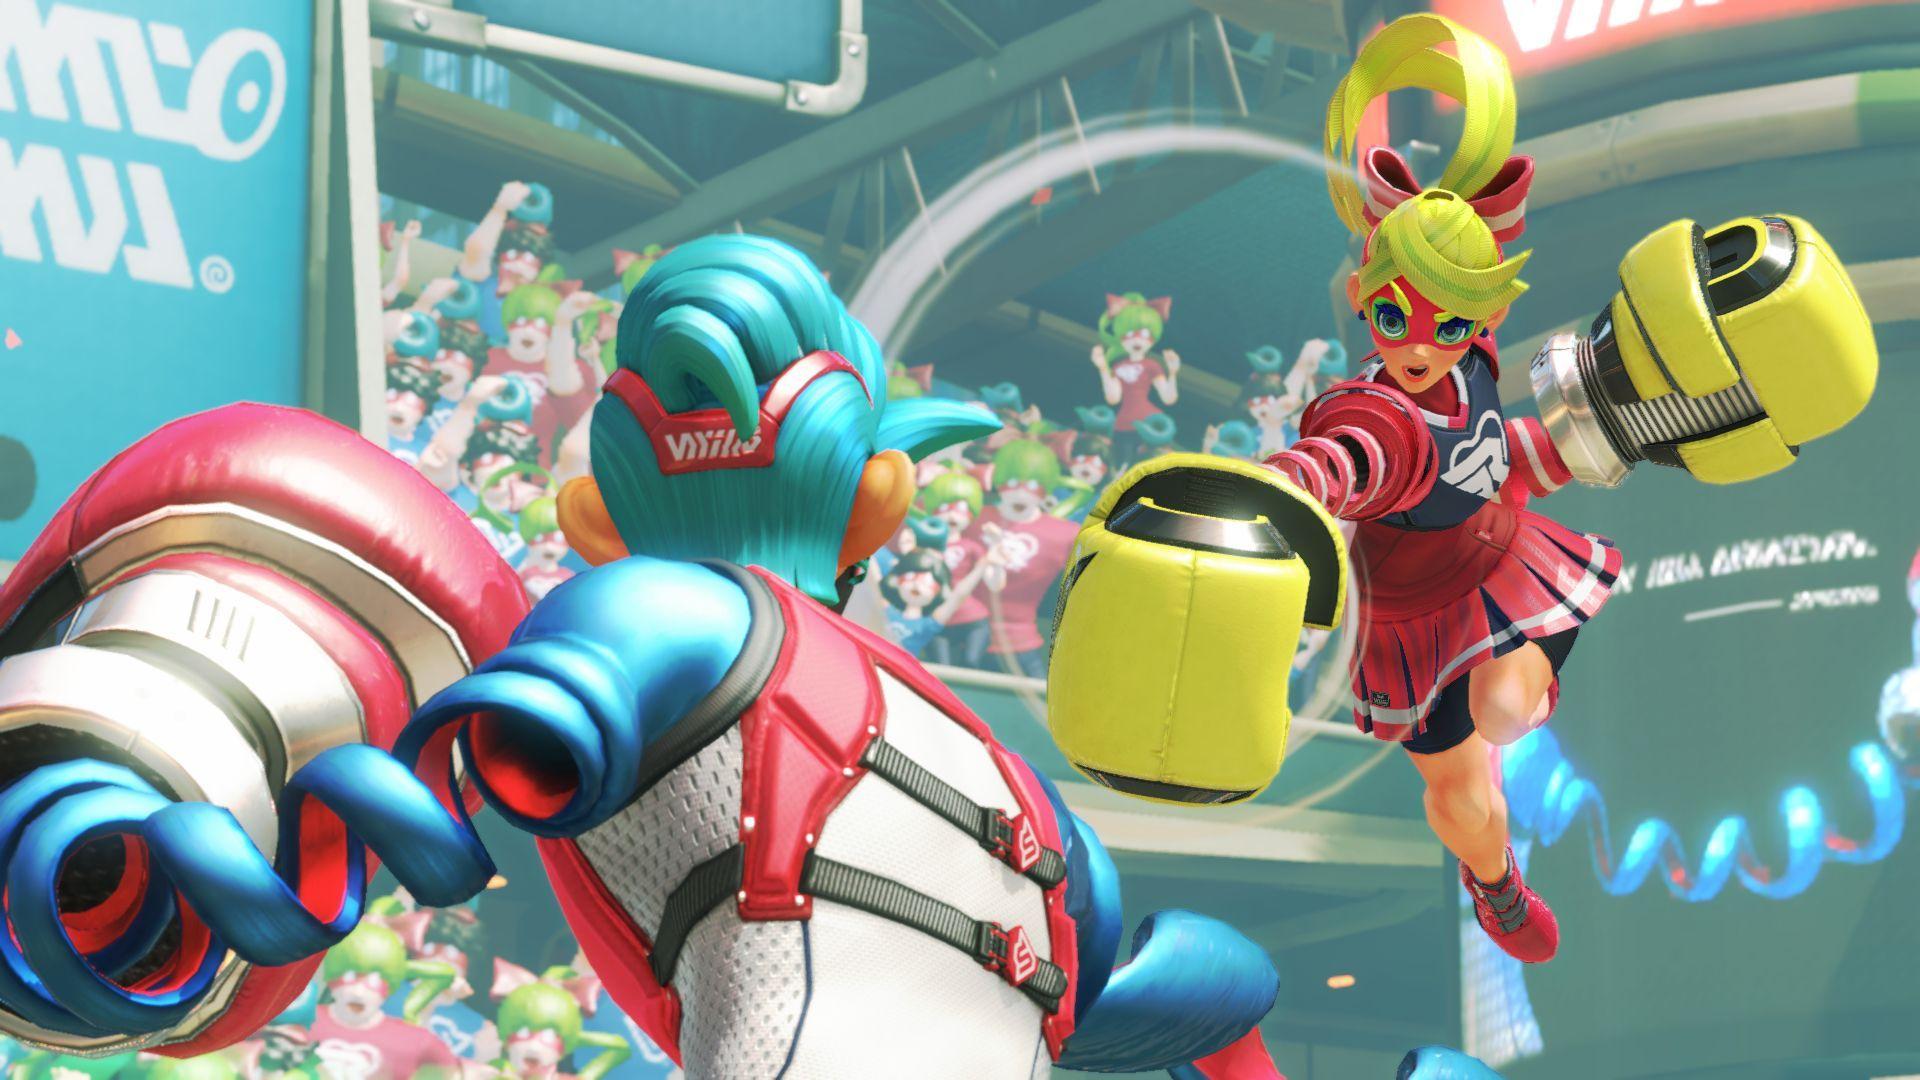 Game preview: ARMS fights to become Nintendo's next big hit